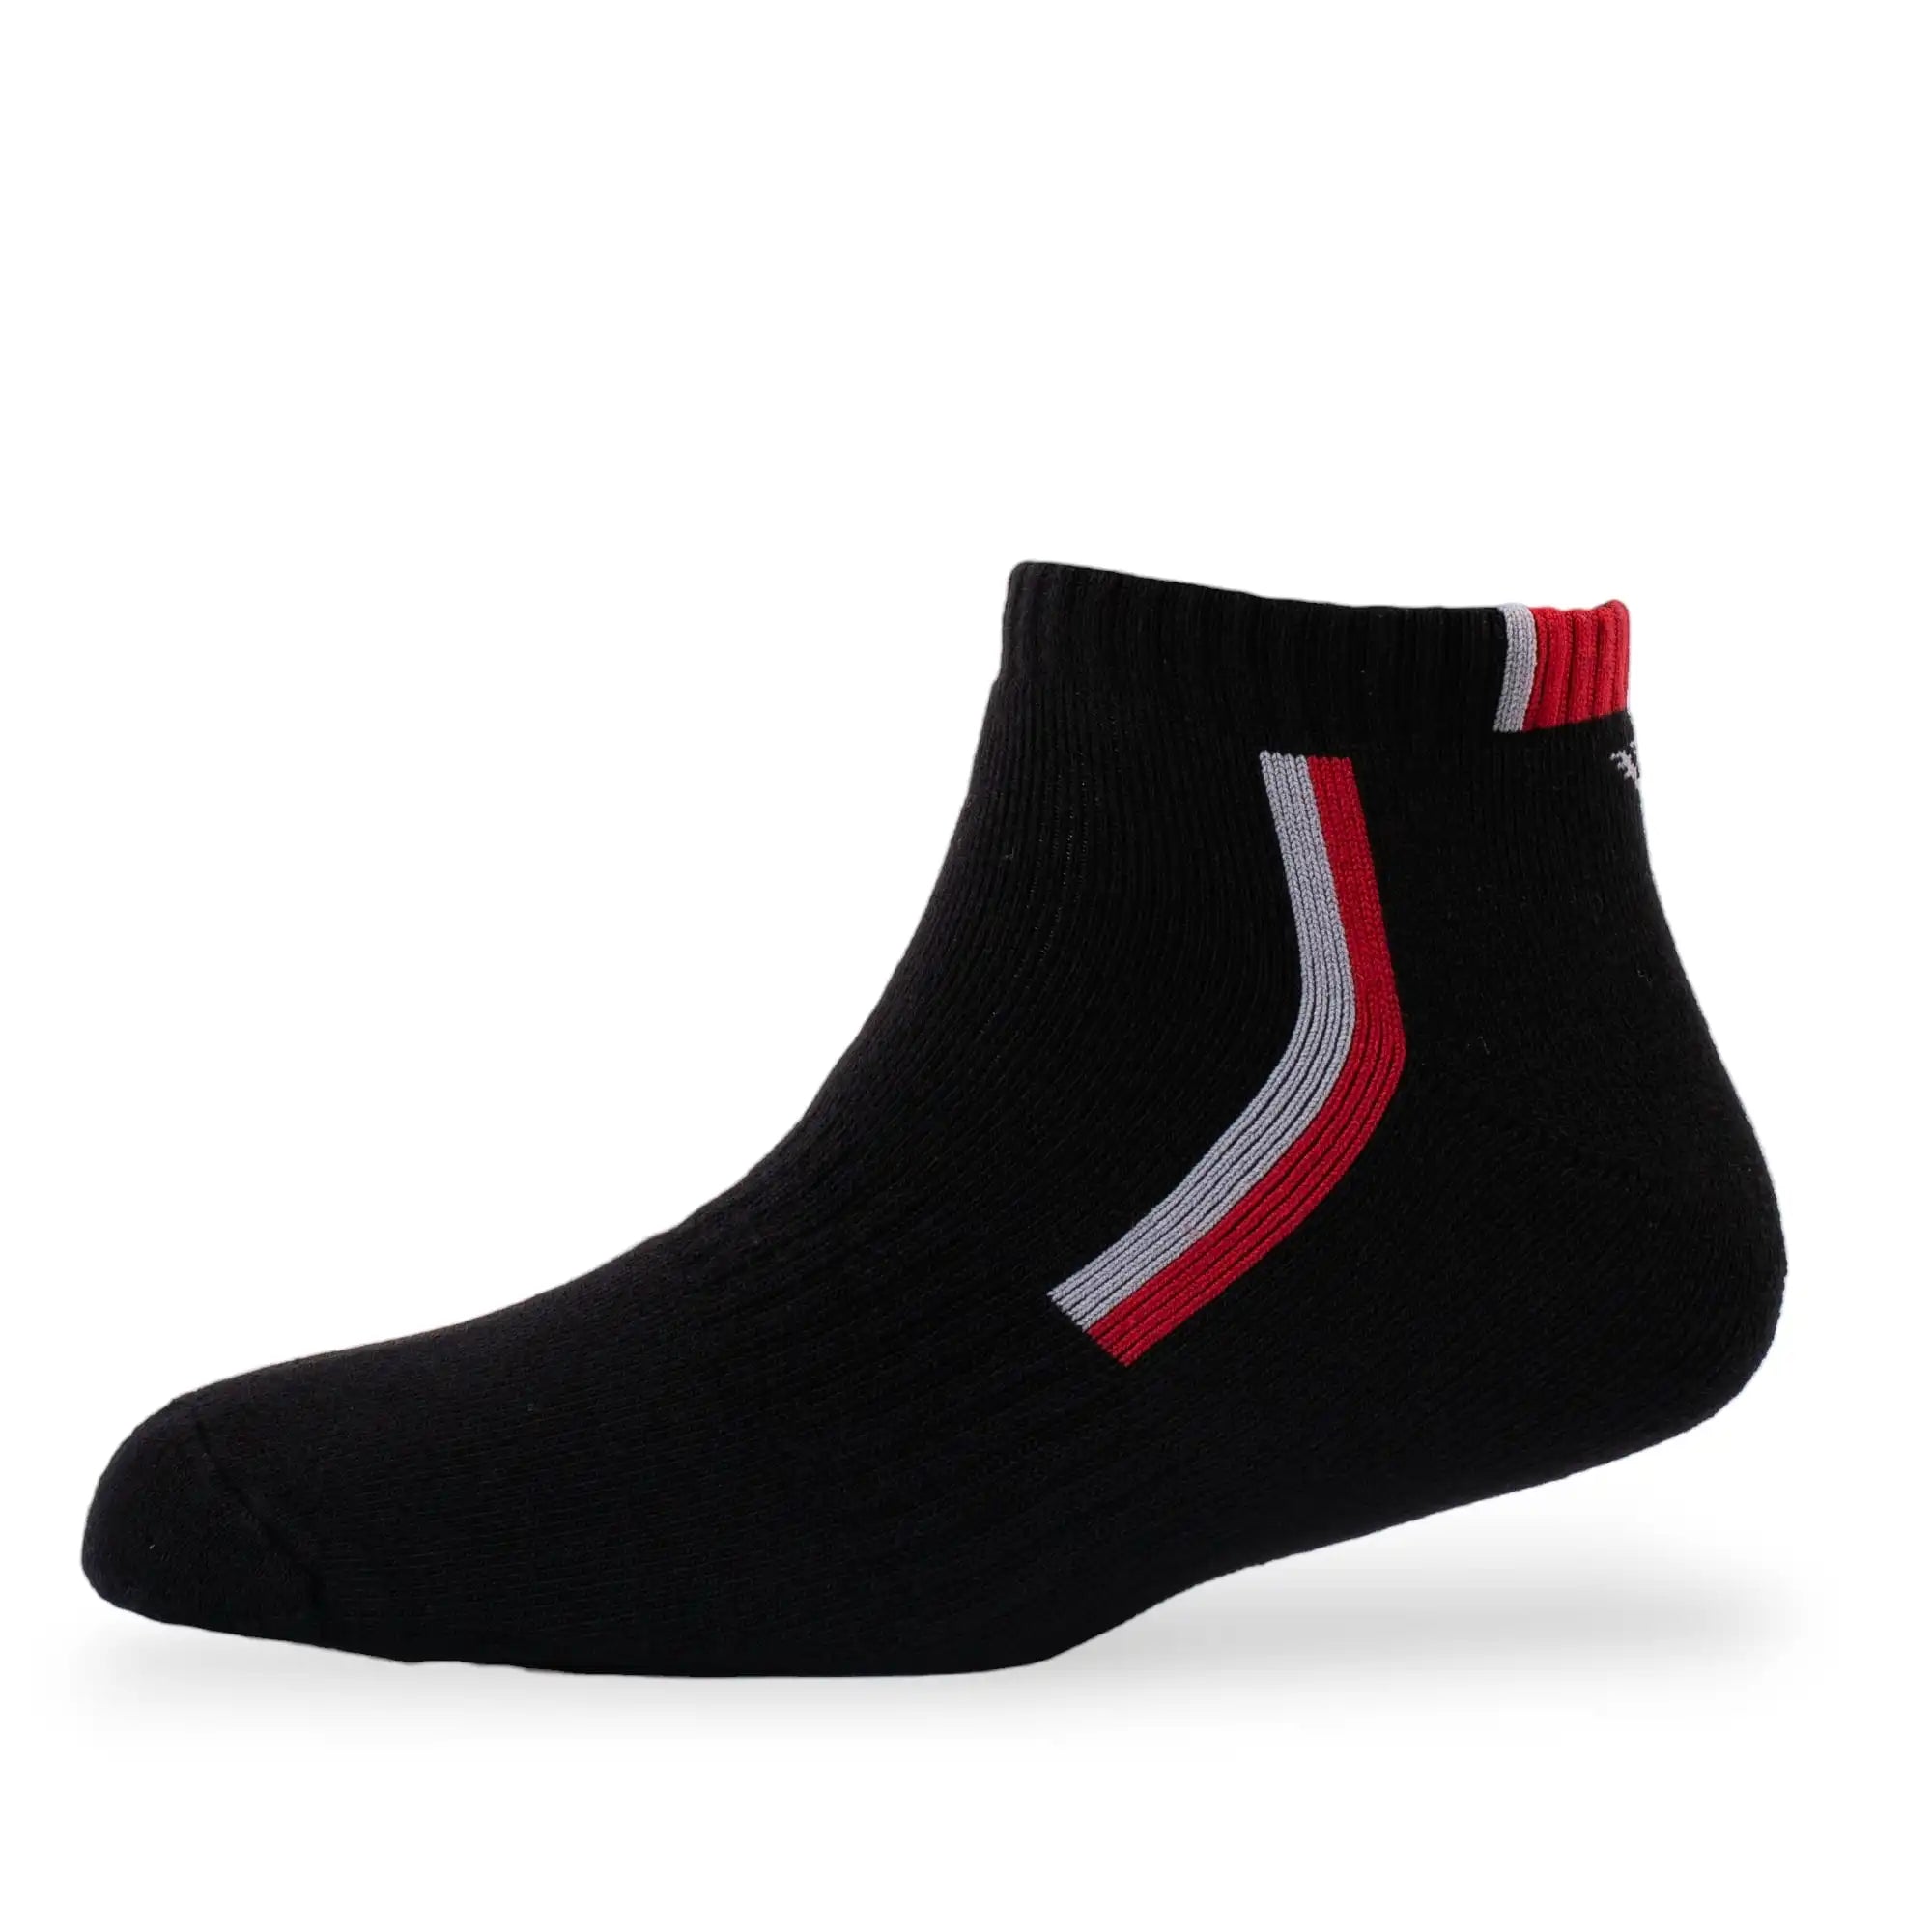 Young Wings Men's Multi Colour Cotton Fabric Design Low Ankle Length Socks - Pack of 3, Style no. 1606-M1